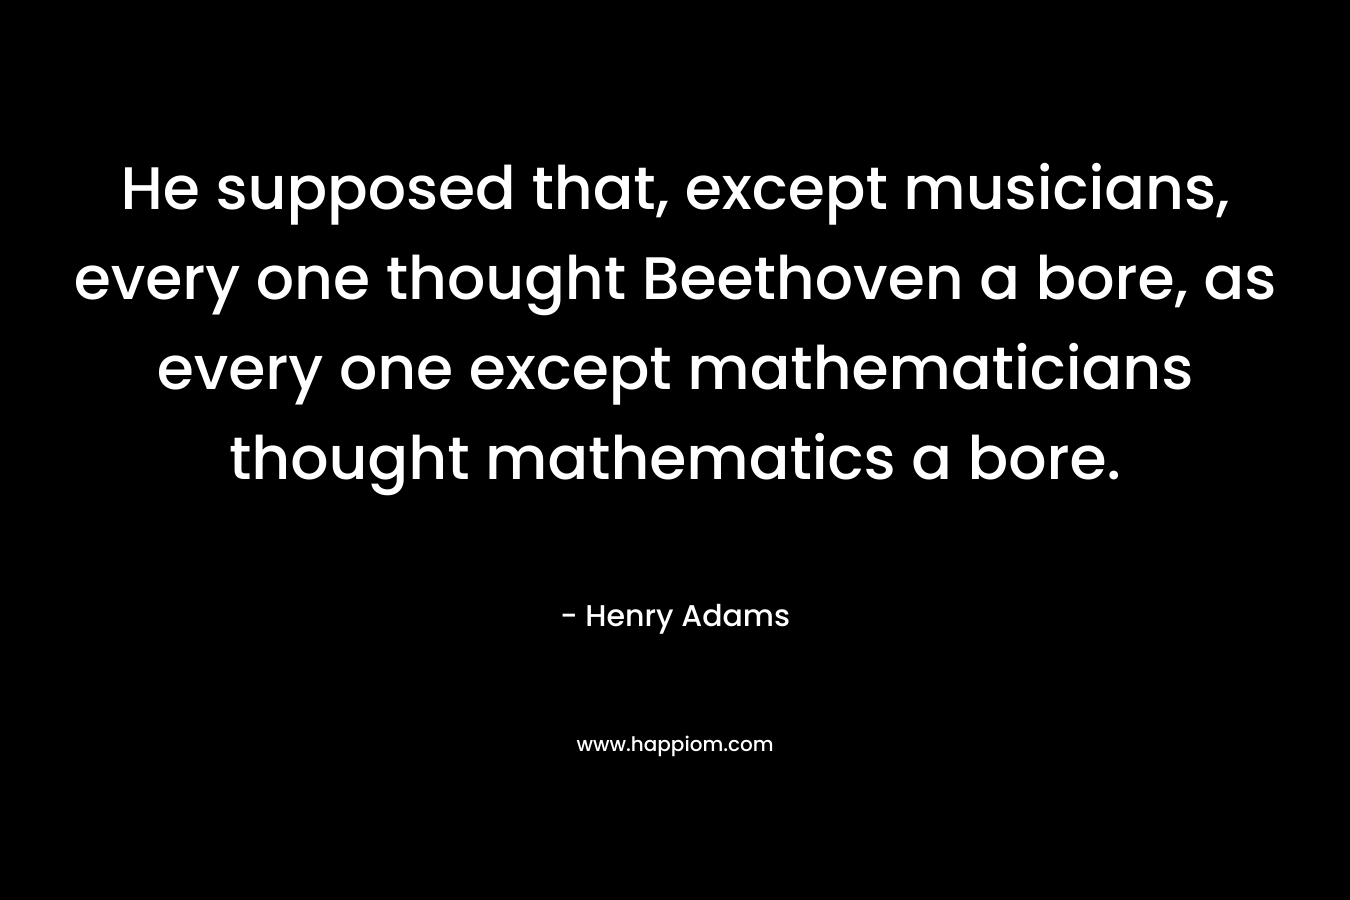 He supposed that, except musicians, every one thought Beethoven a bore, as every one except mathematicians thought mathematics a bore.